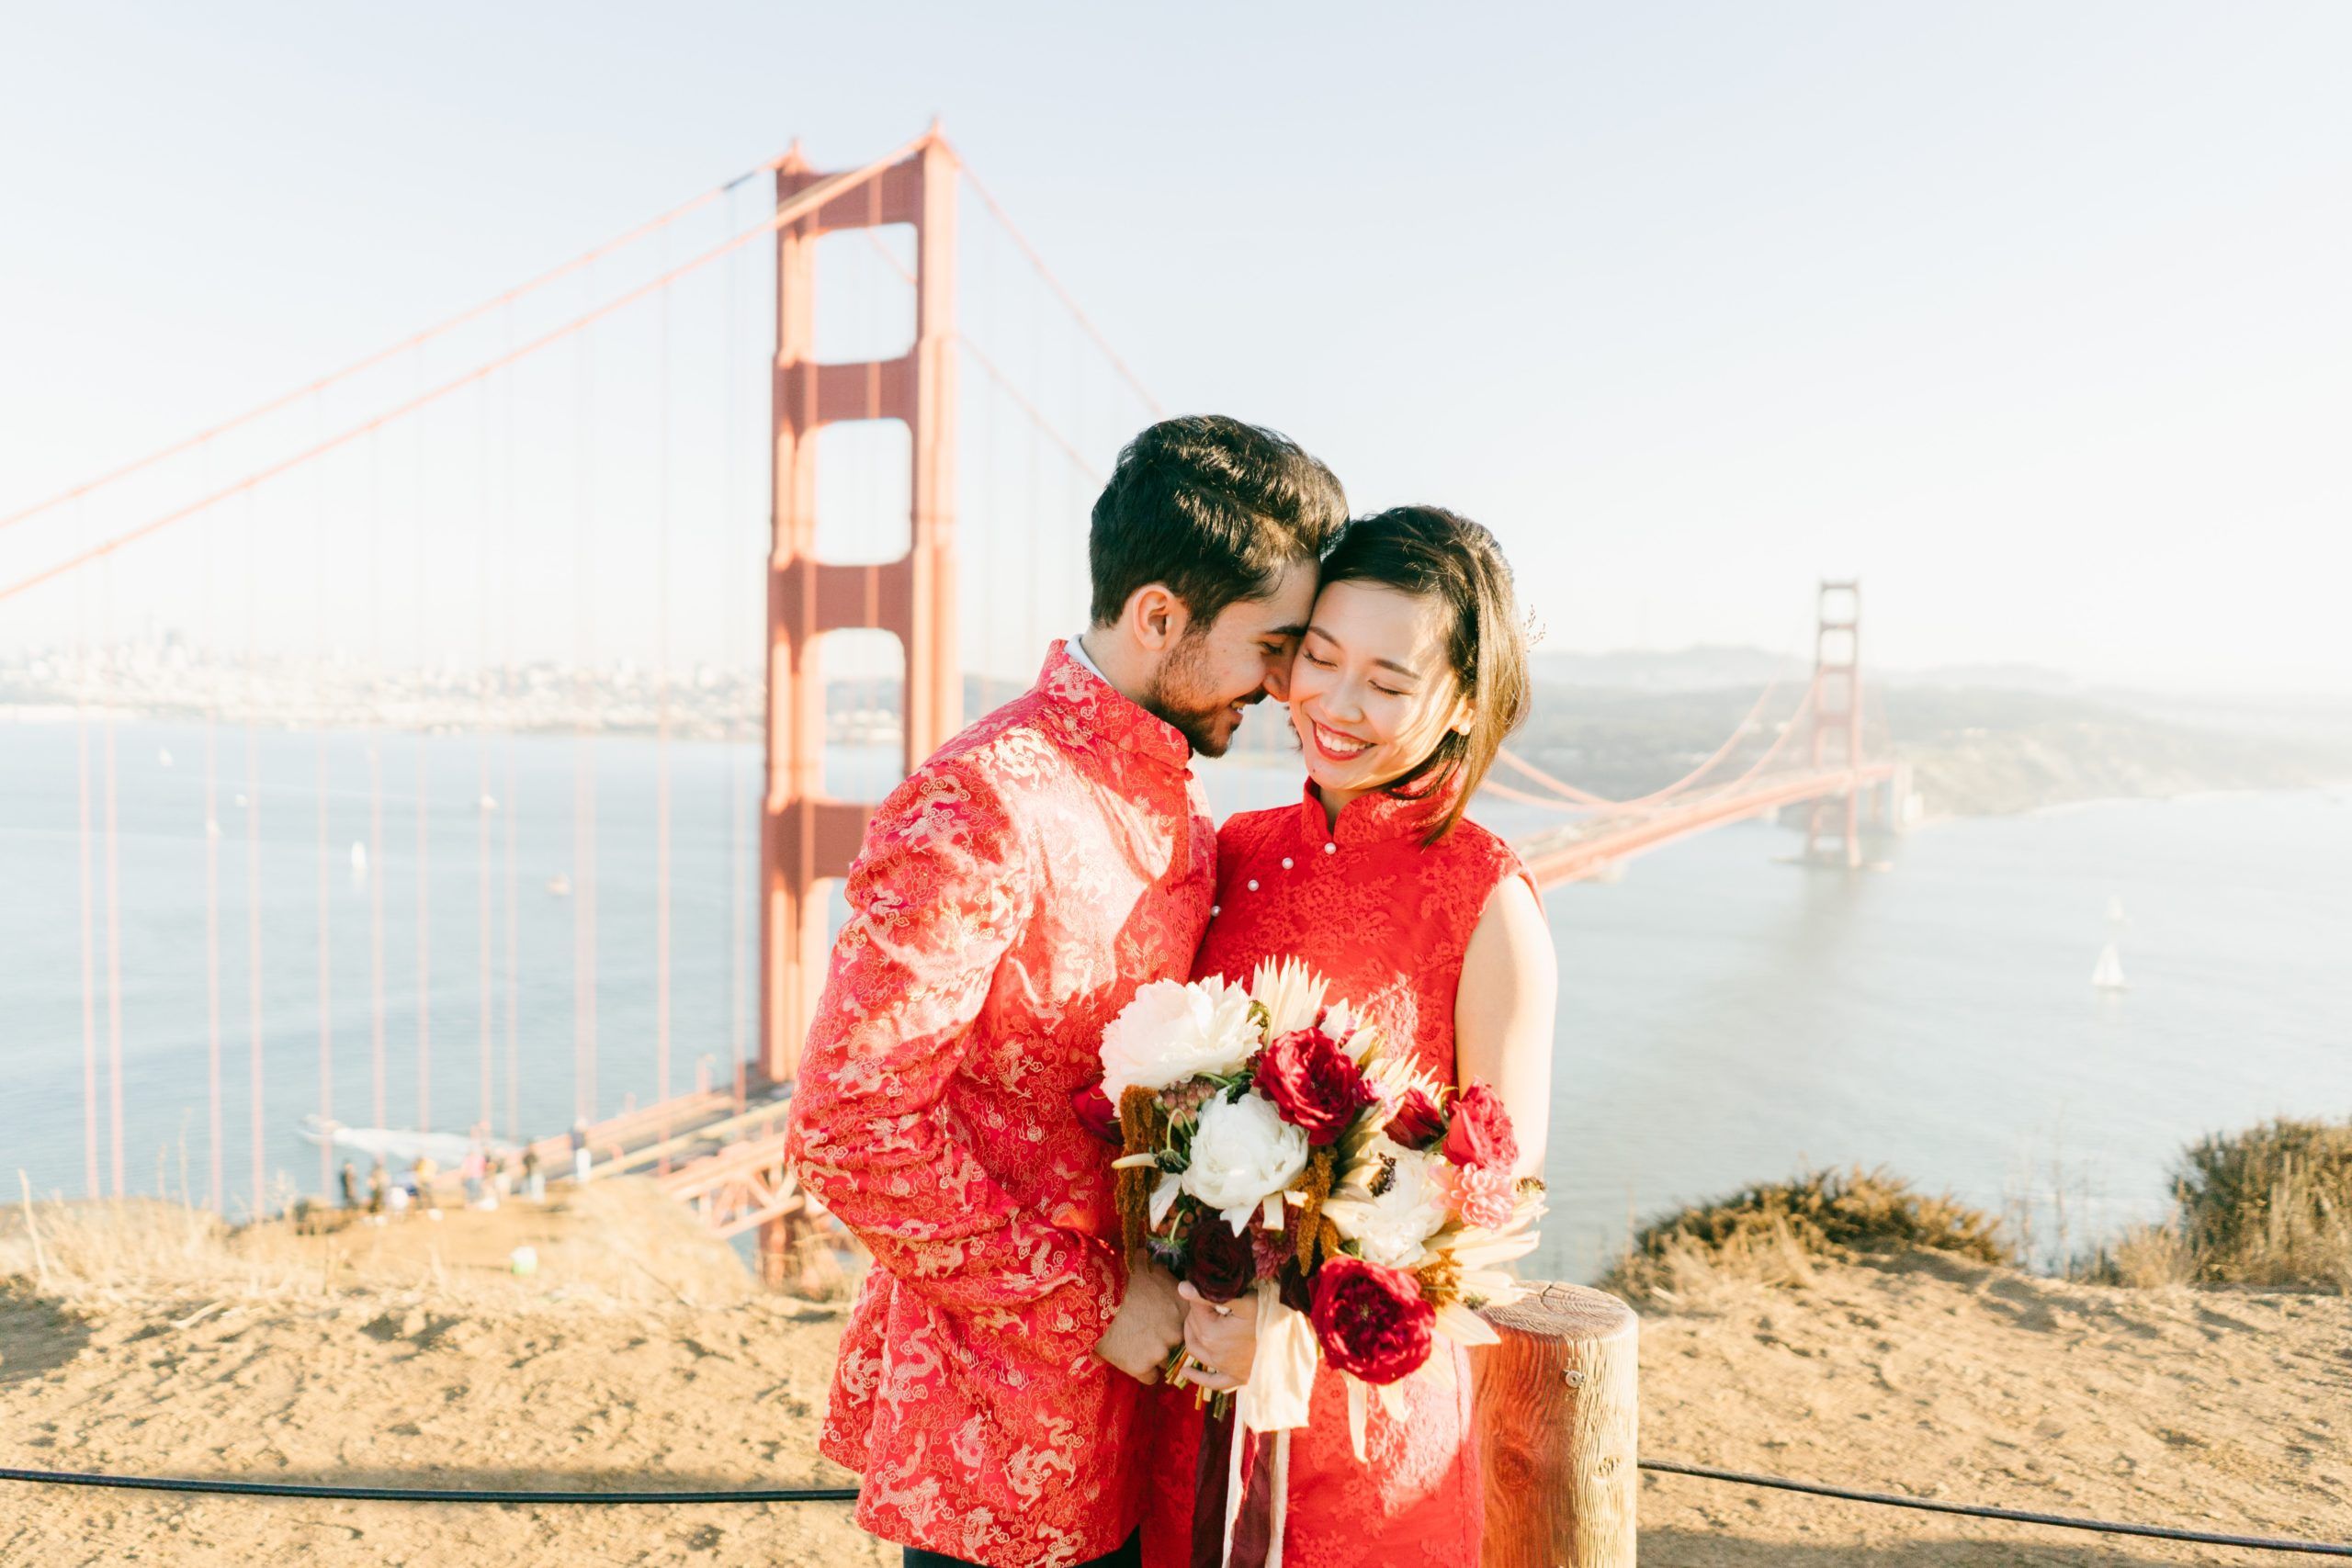 Bride and groom in red holding bouquet of flowers | Spark Experiences microwedding planners in the Bay Area